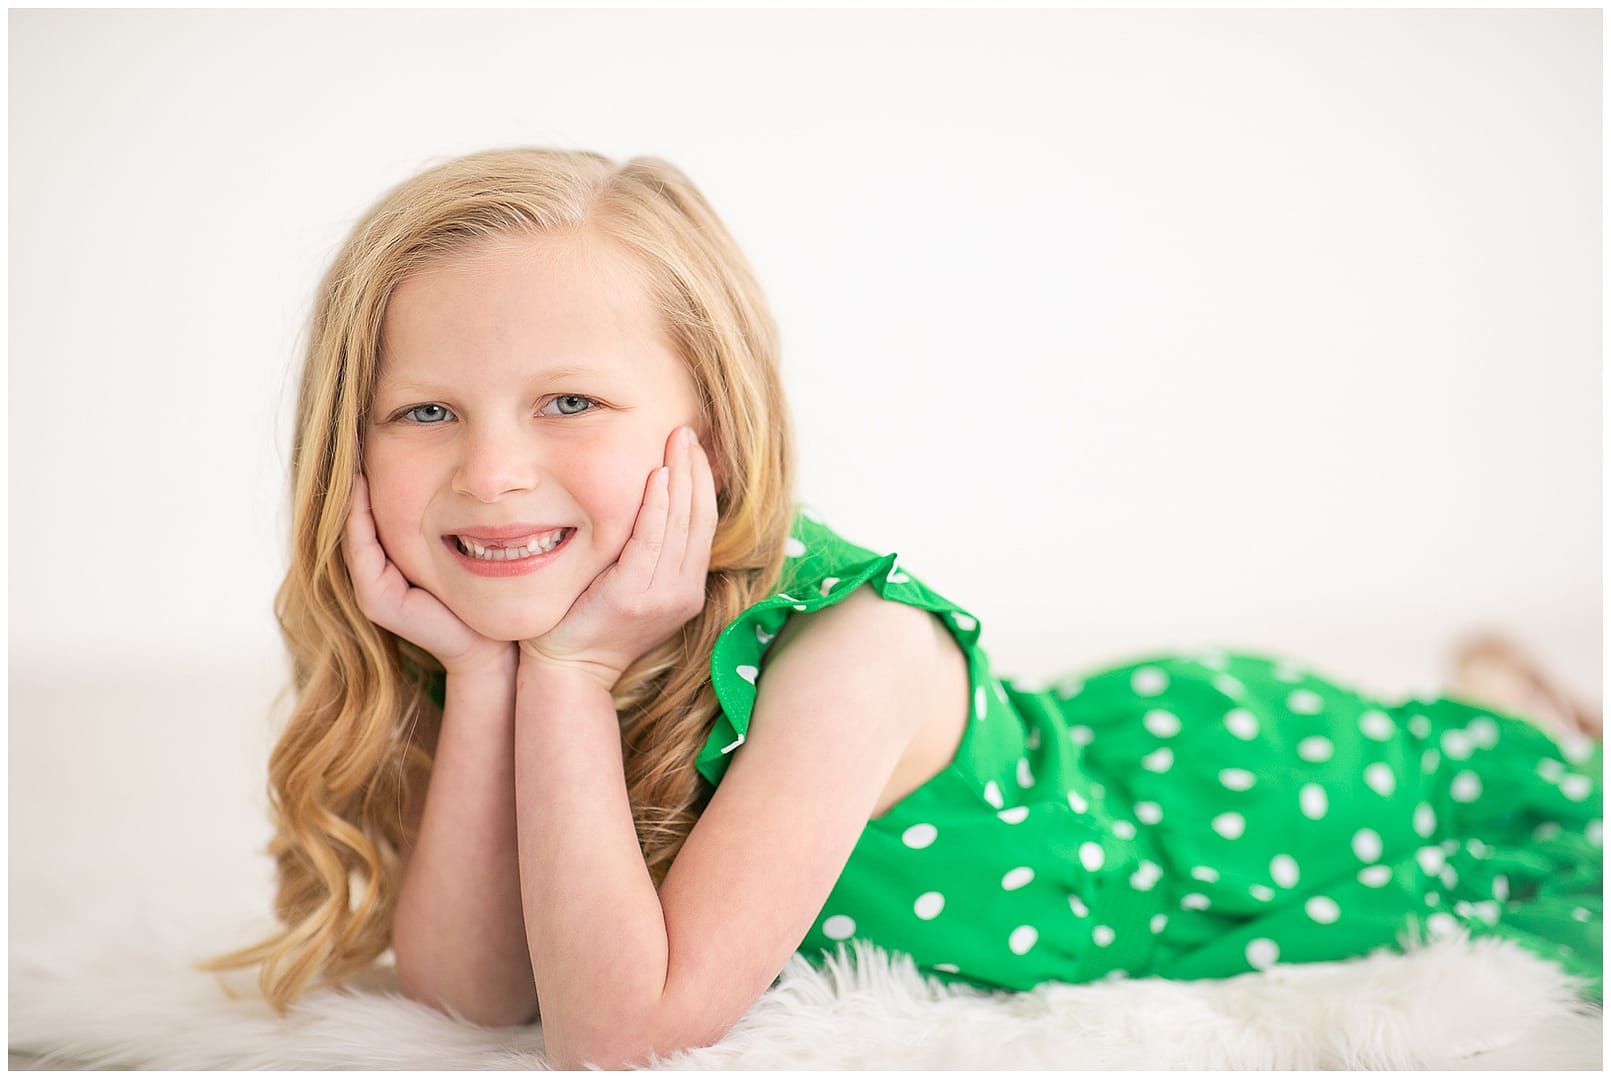 Child poses for portrait. Photos by Tiffany Hix Photography.